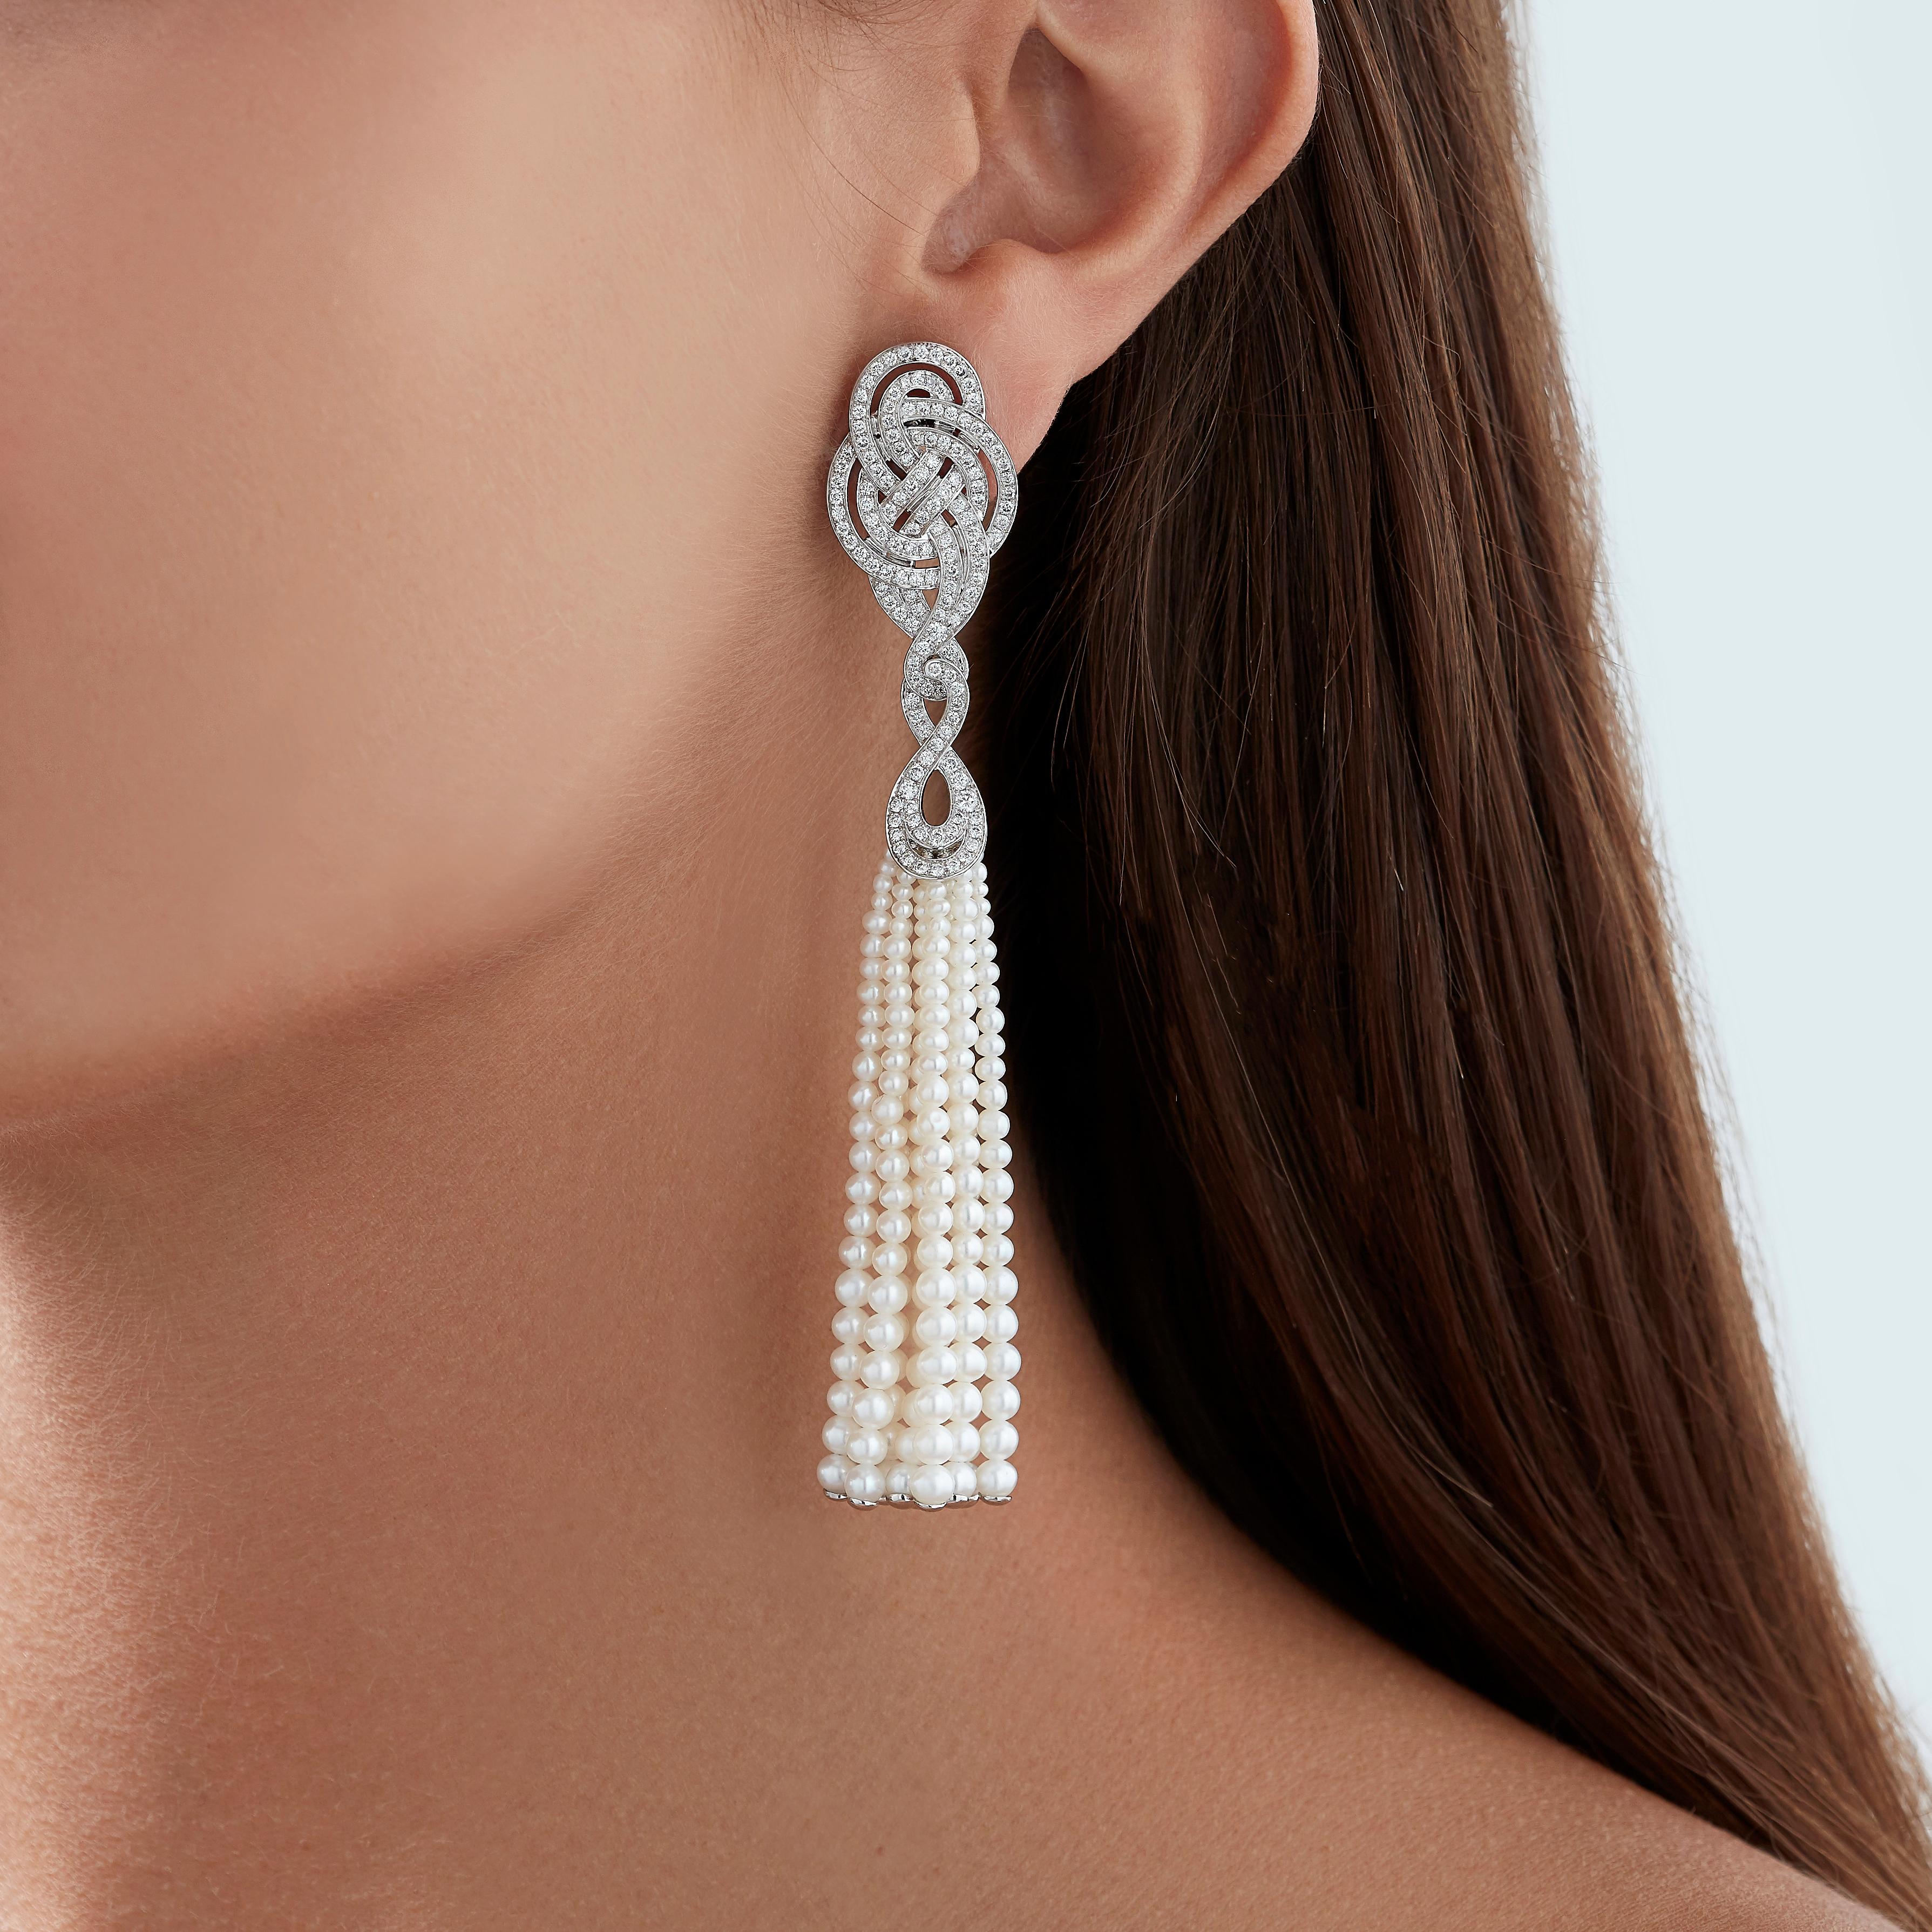 A House of Garrard pair of 18 karat white gold earrings from the 'Entanglement' collection, set with round white diamonds and white pearls.

284 round white diamonds weighing: 1.99cts
18 strands of white pearls                                       